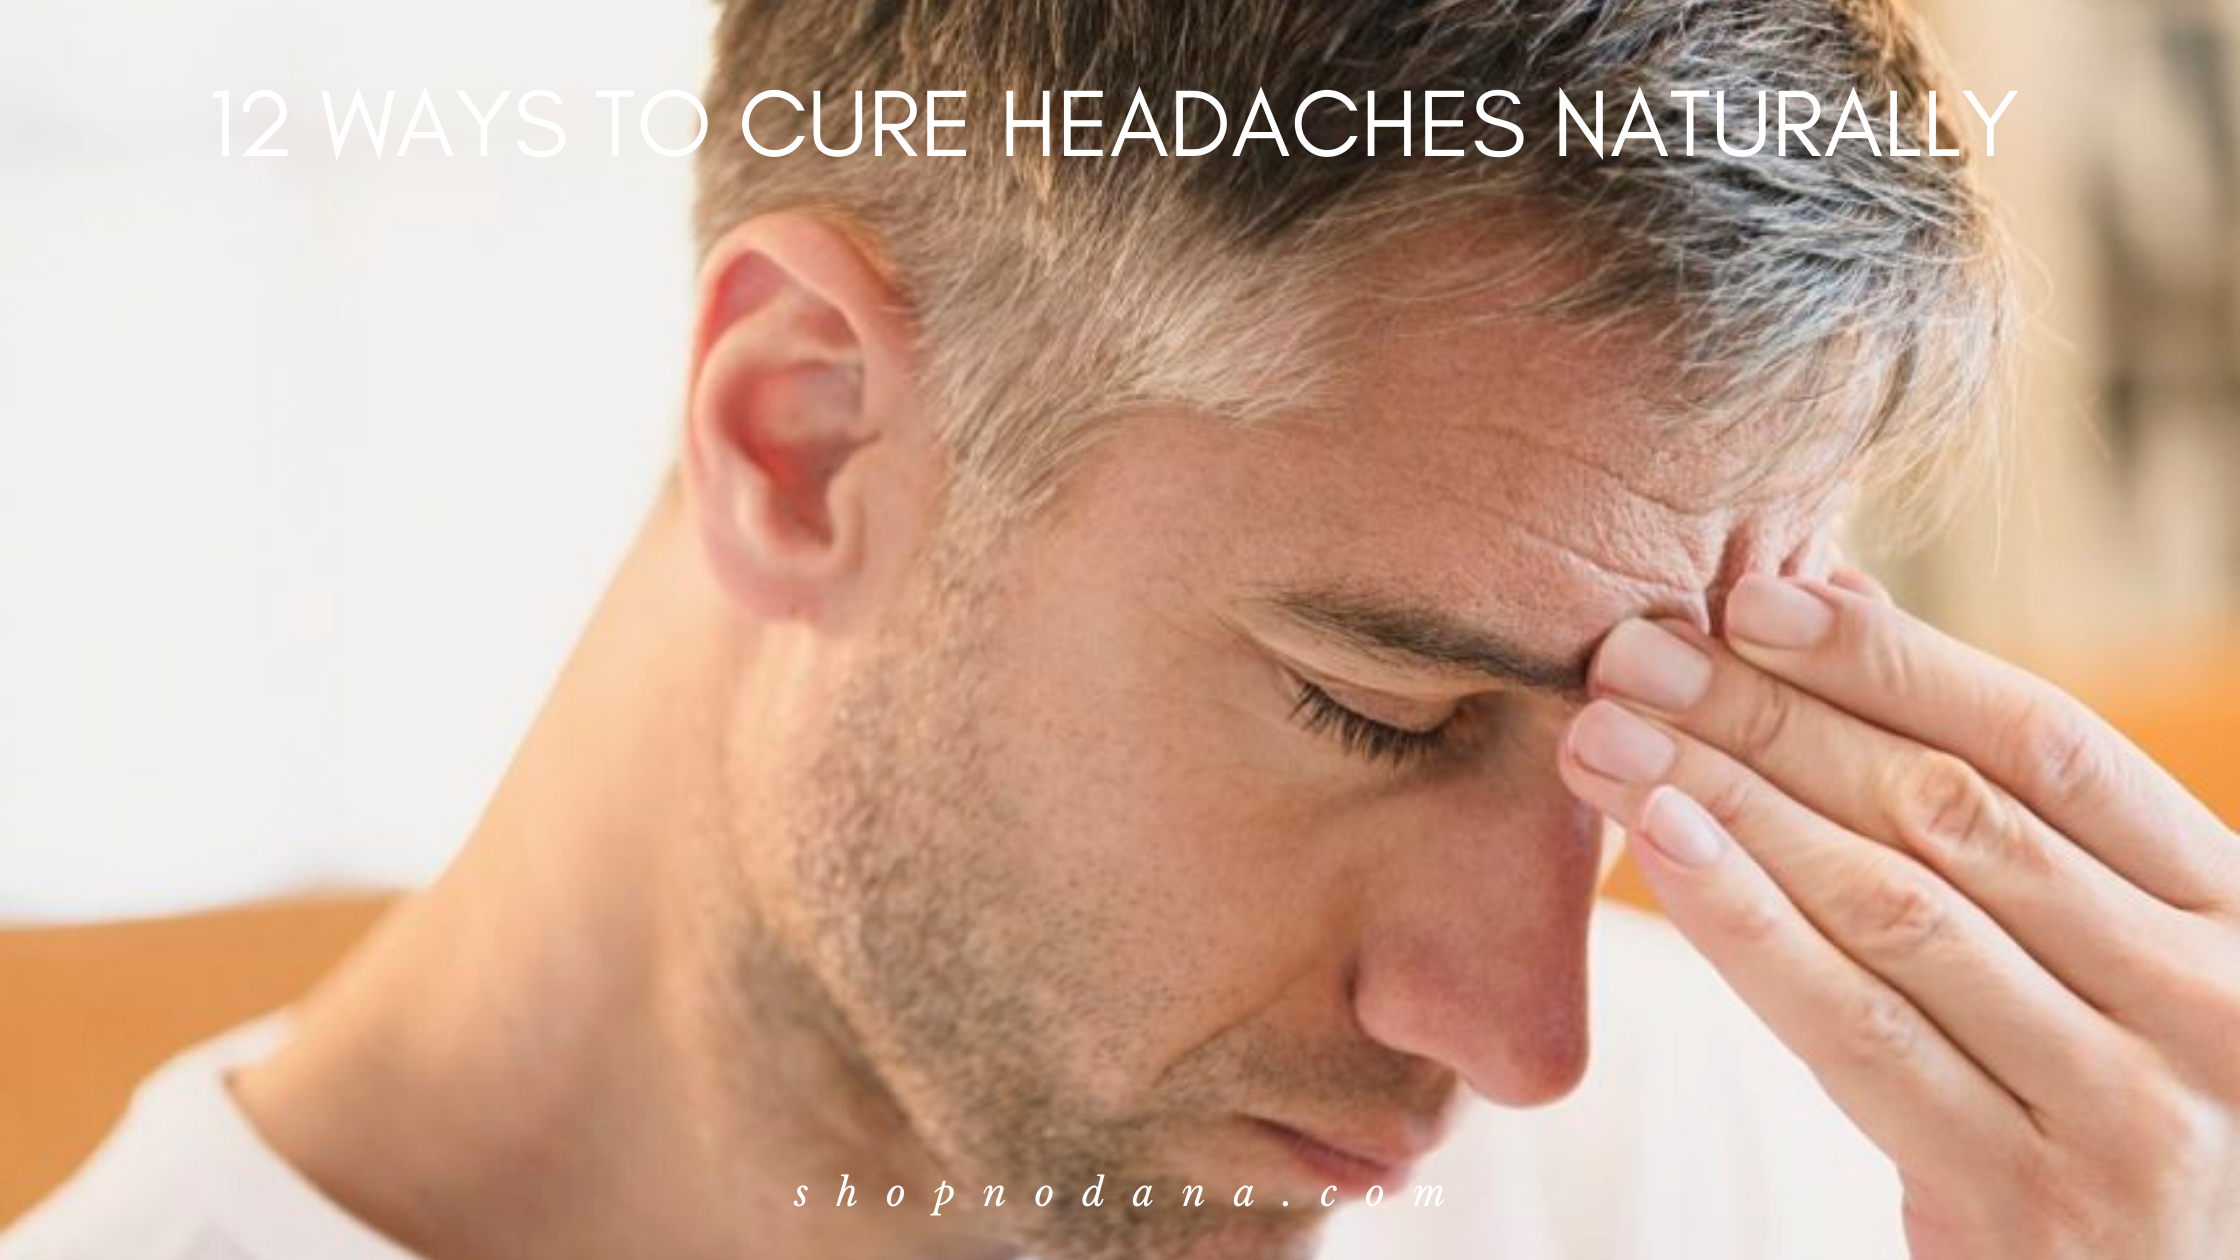 11 ways to cure headaches naturally